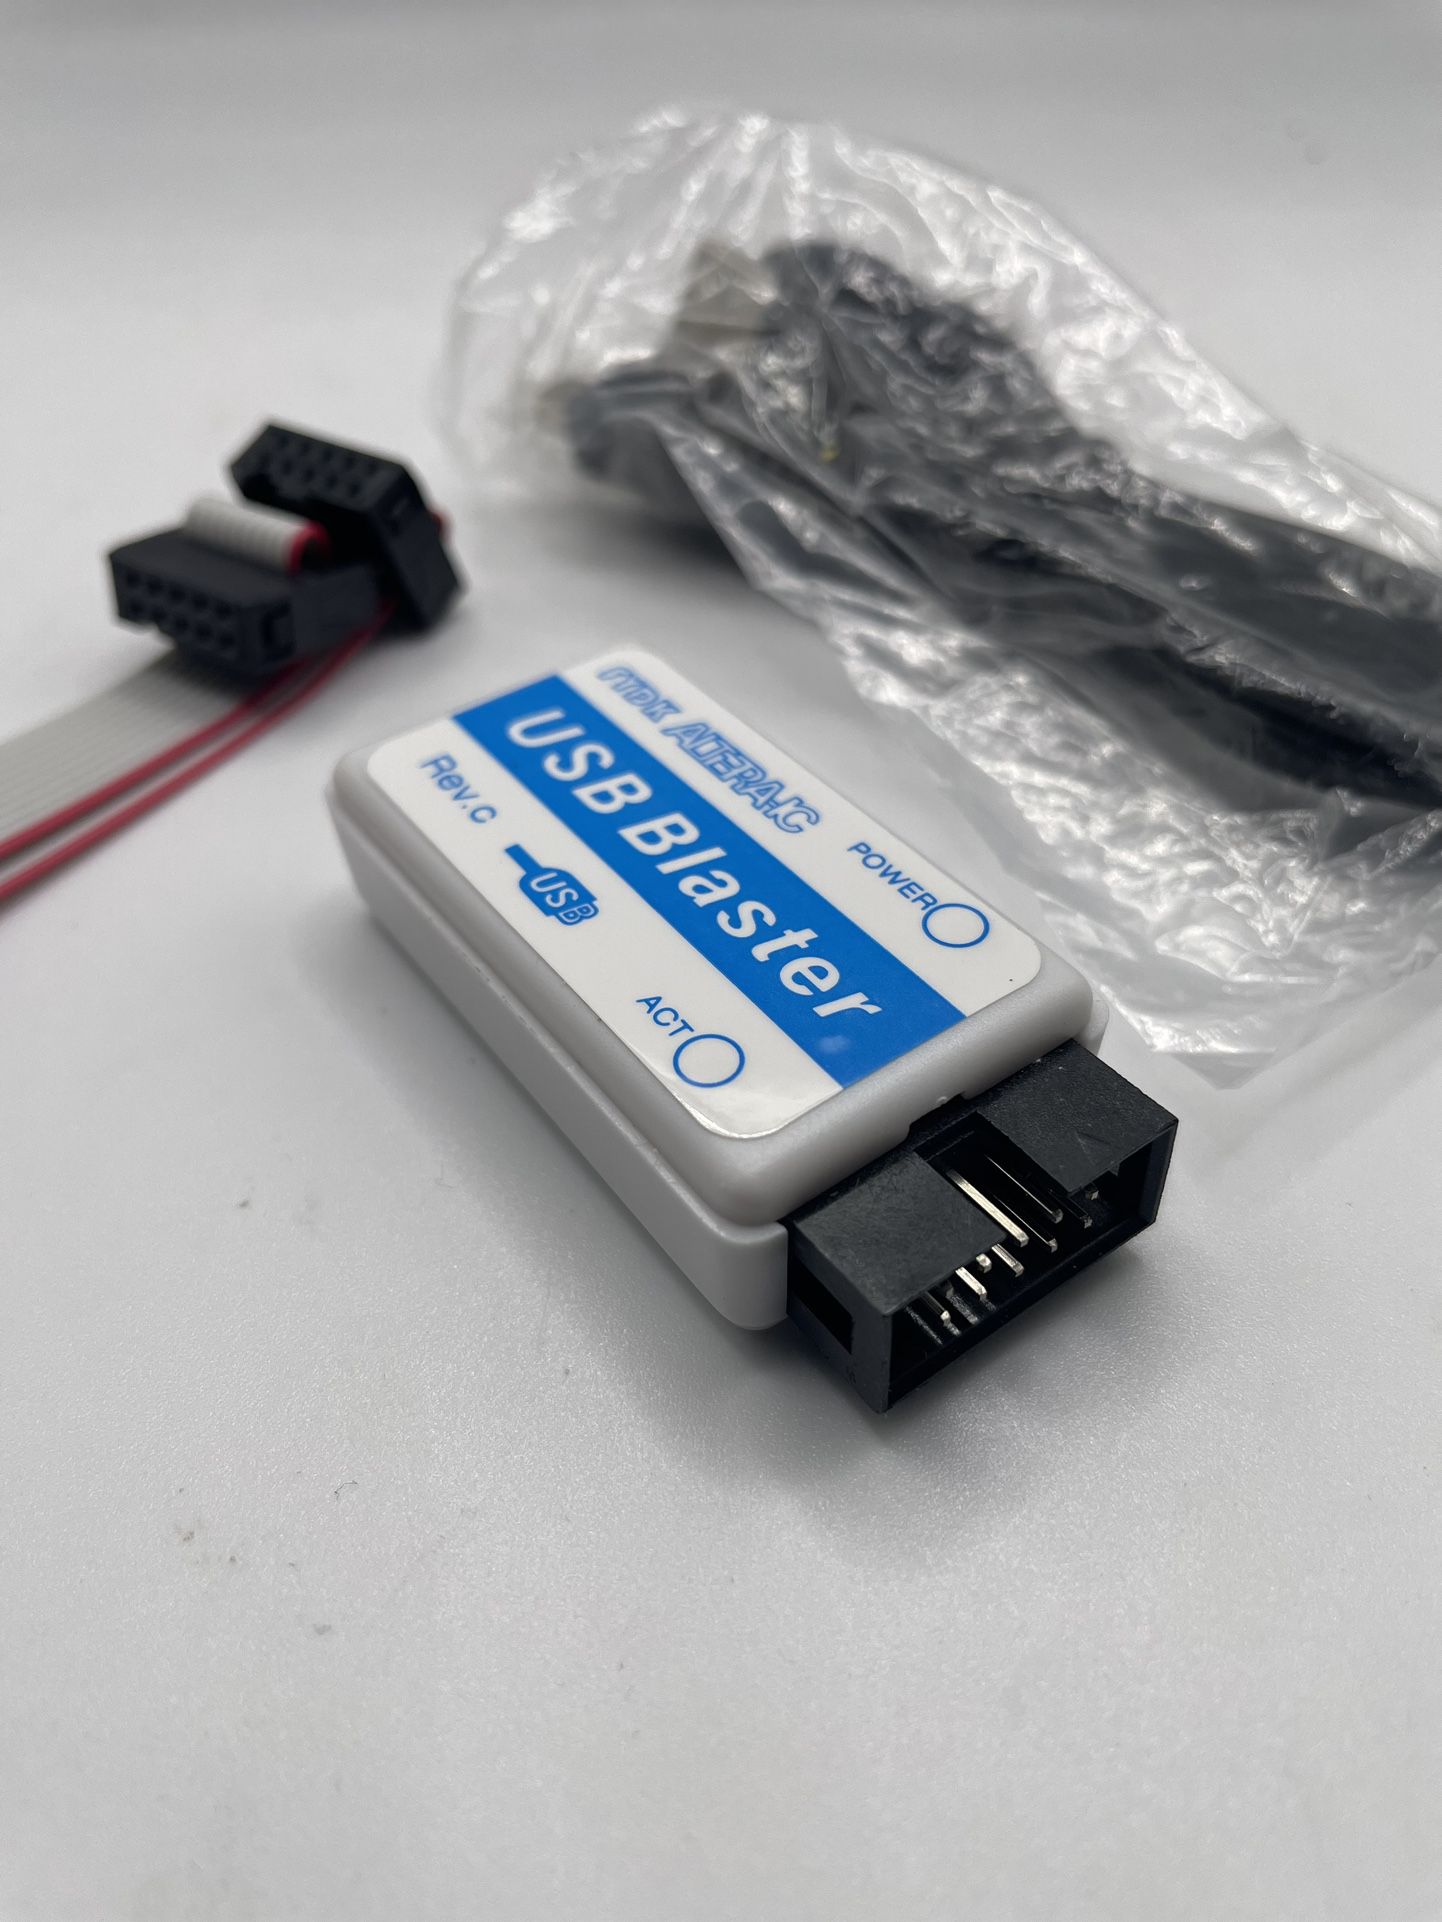 USB Blaster Download Cable for Sale in Las Vegas, - OfferUp